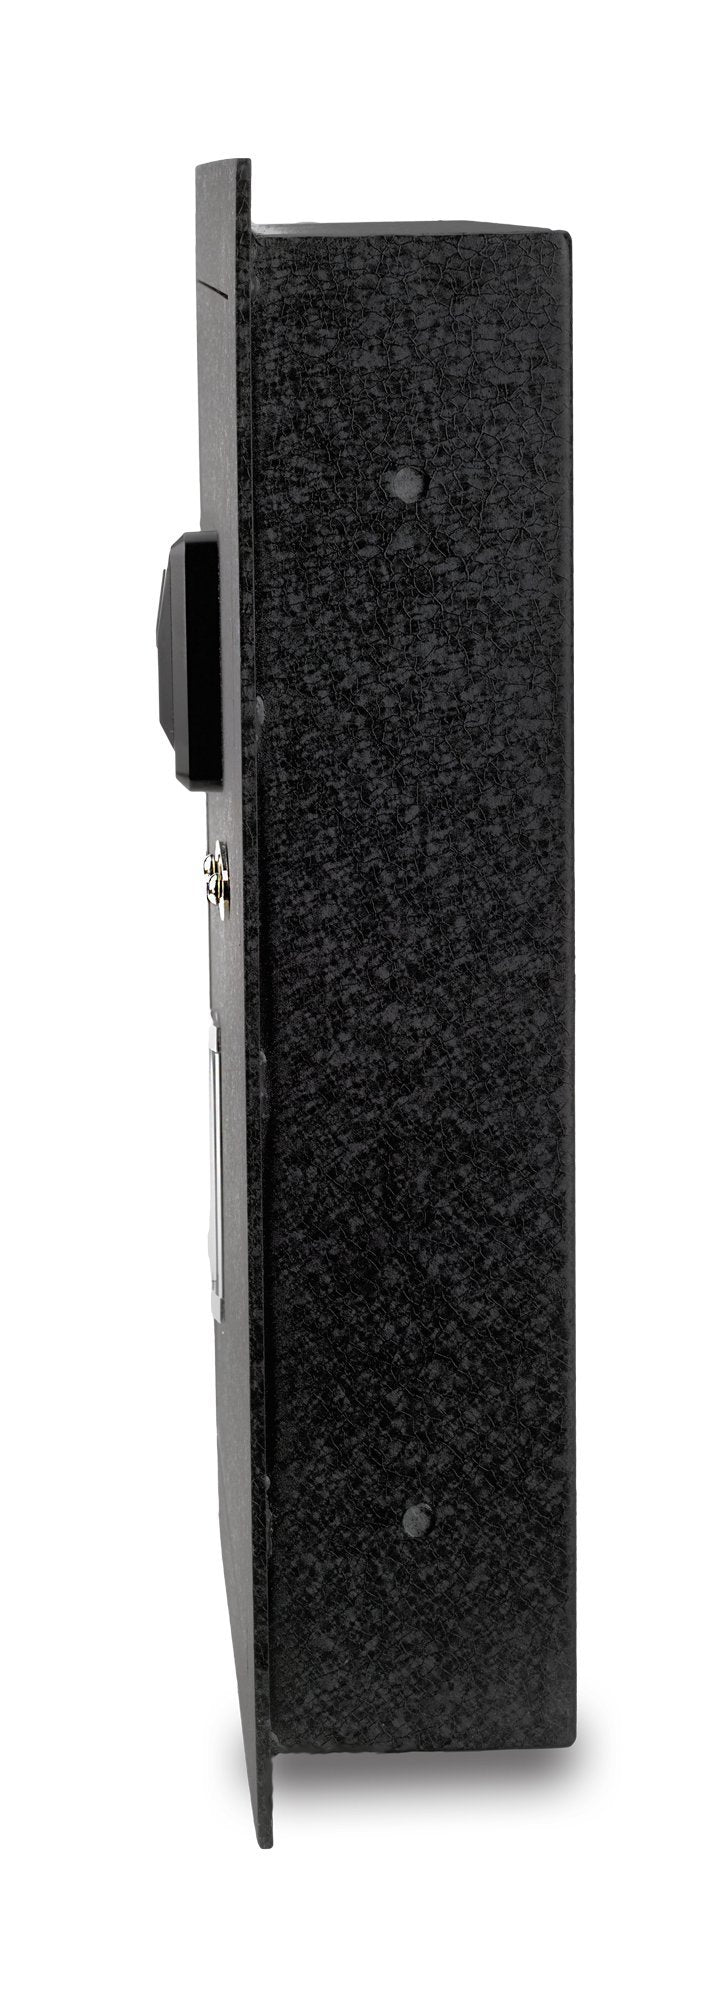 Viking VS-52BLX Hidden in Wall Safe Biometric Safe Side View